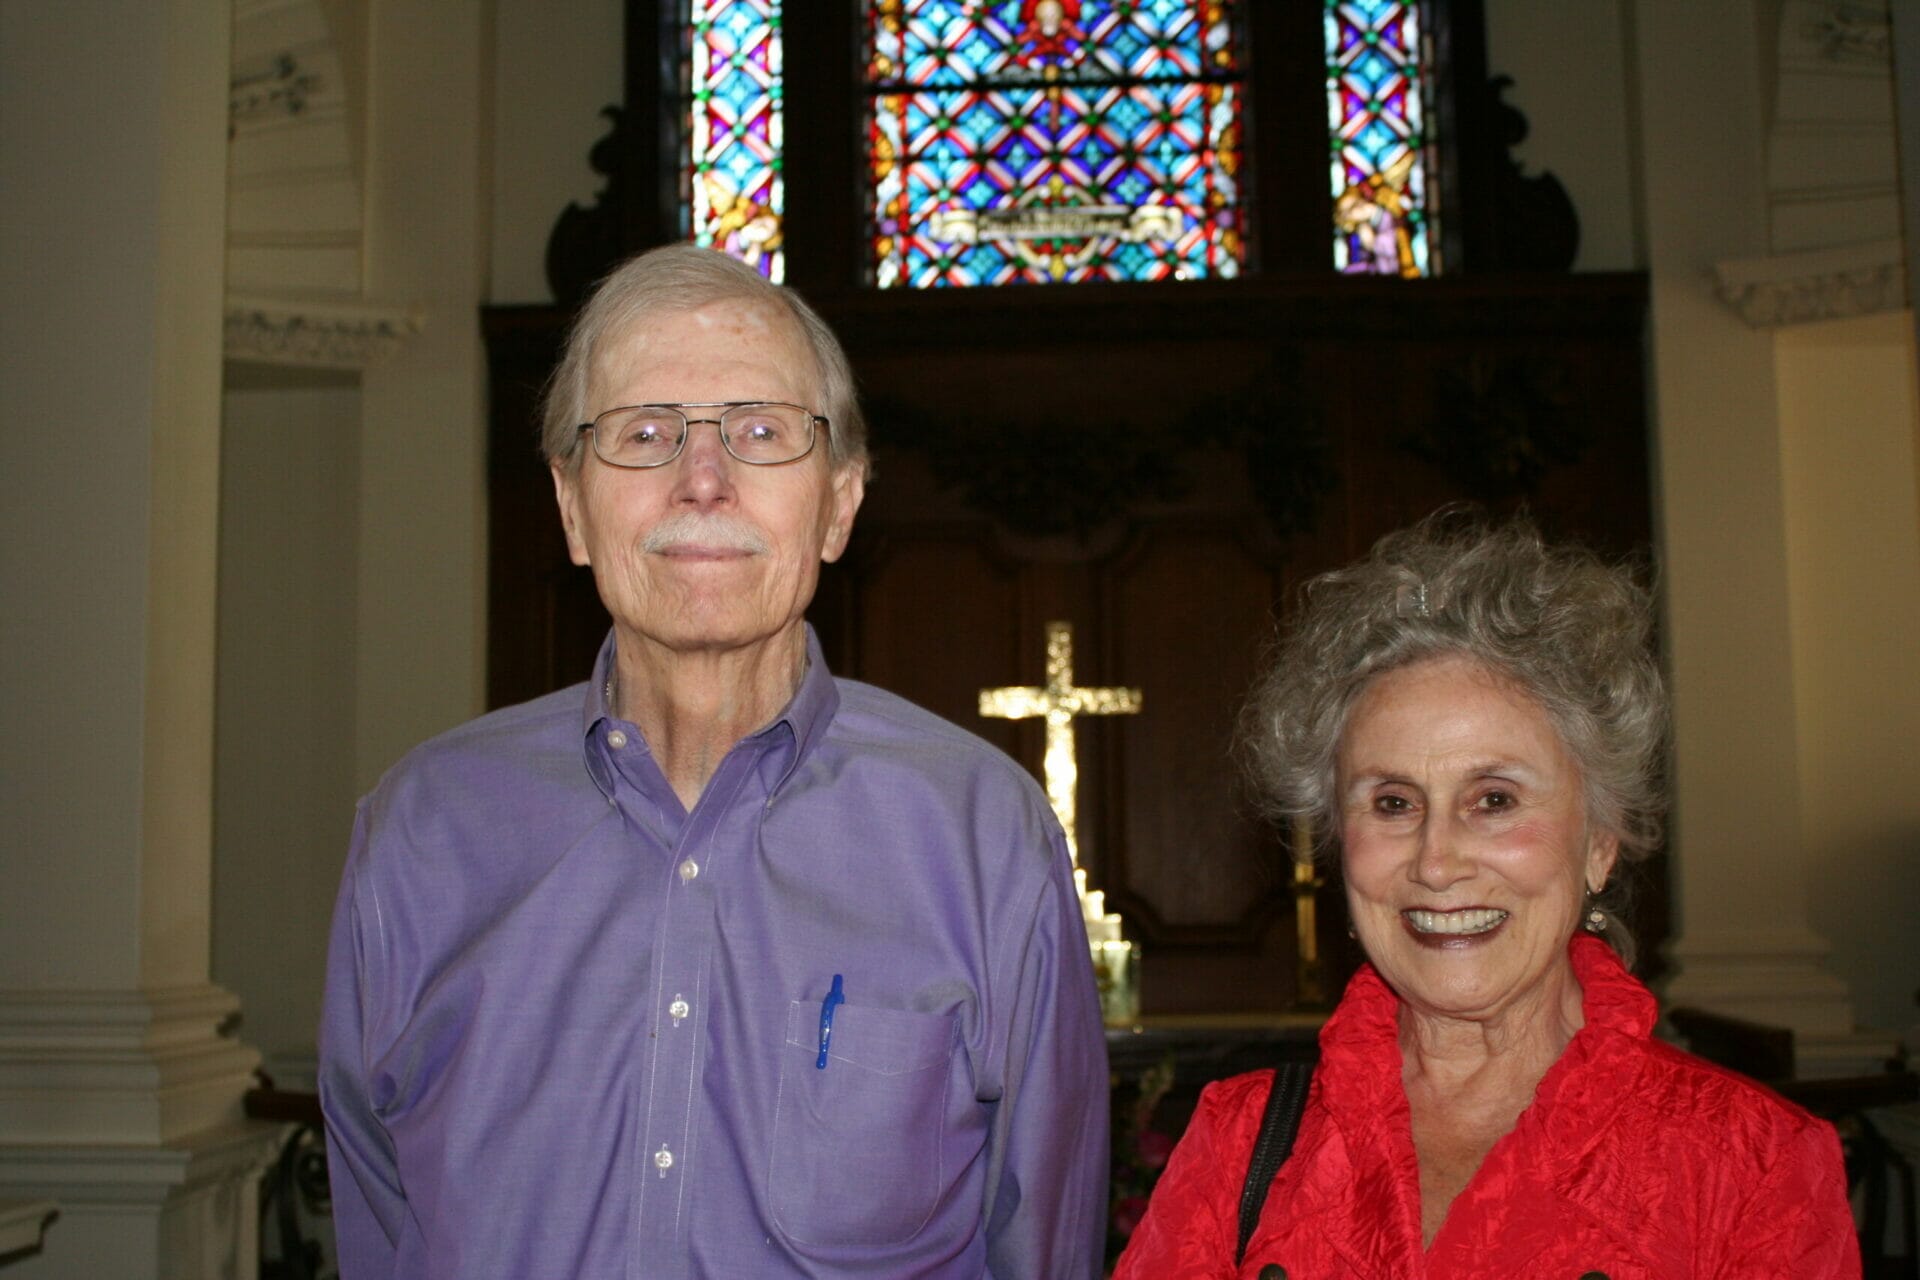 Rev. Martha Forrest, and her late husband, Bob Forrest, established legacy gifts to support causes in perpetuity.